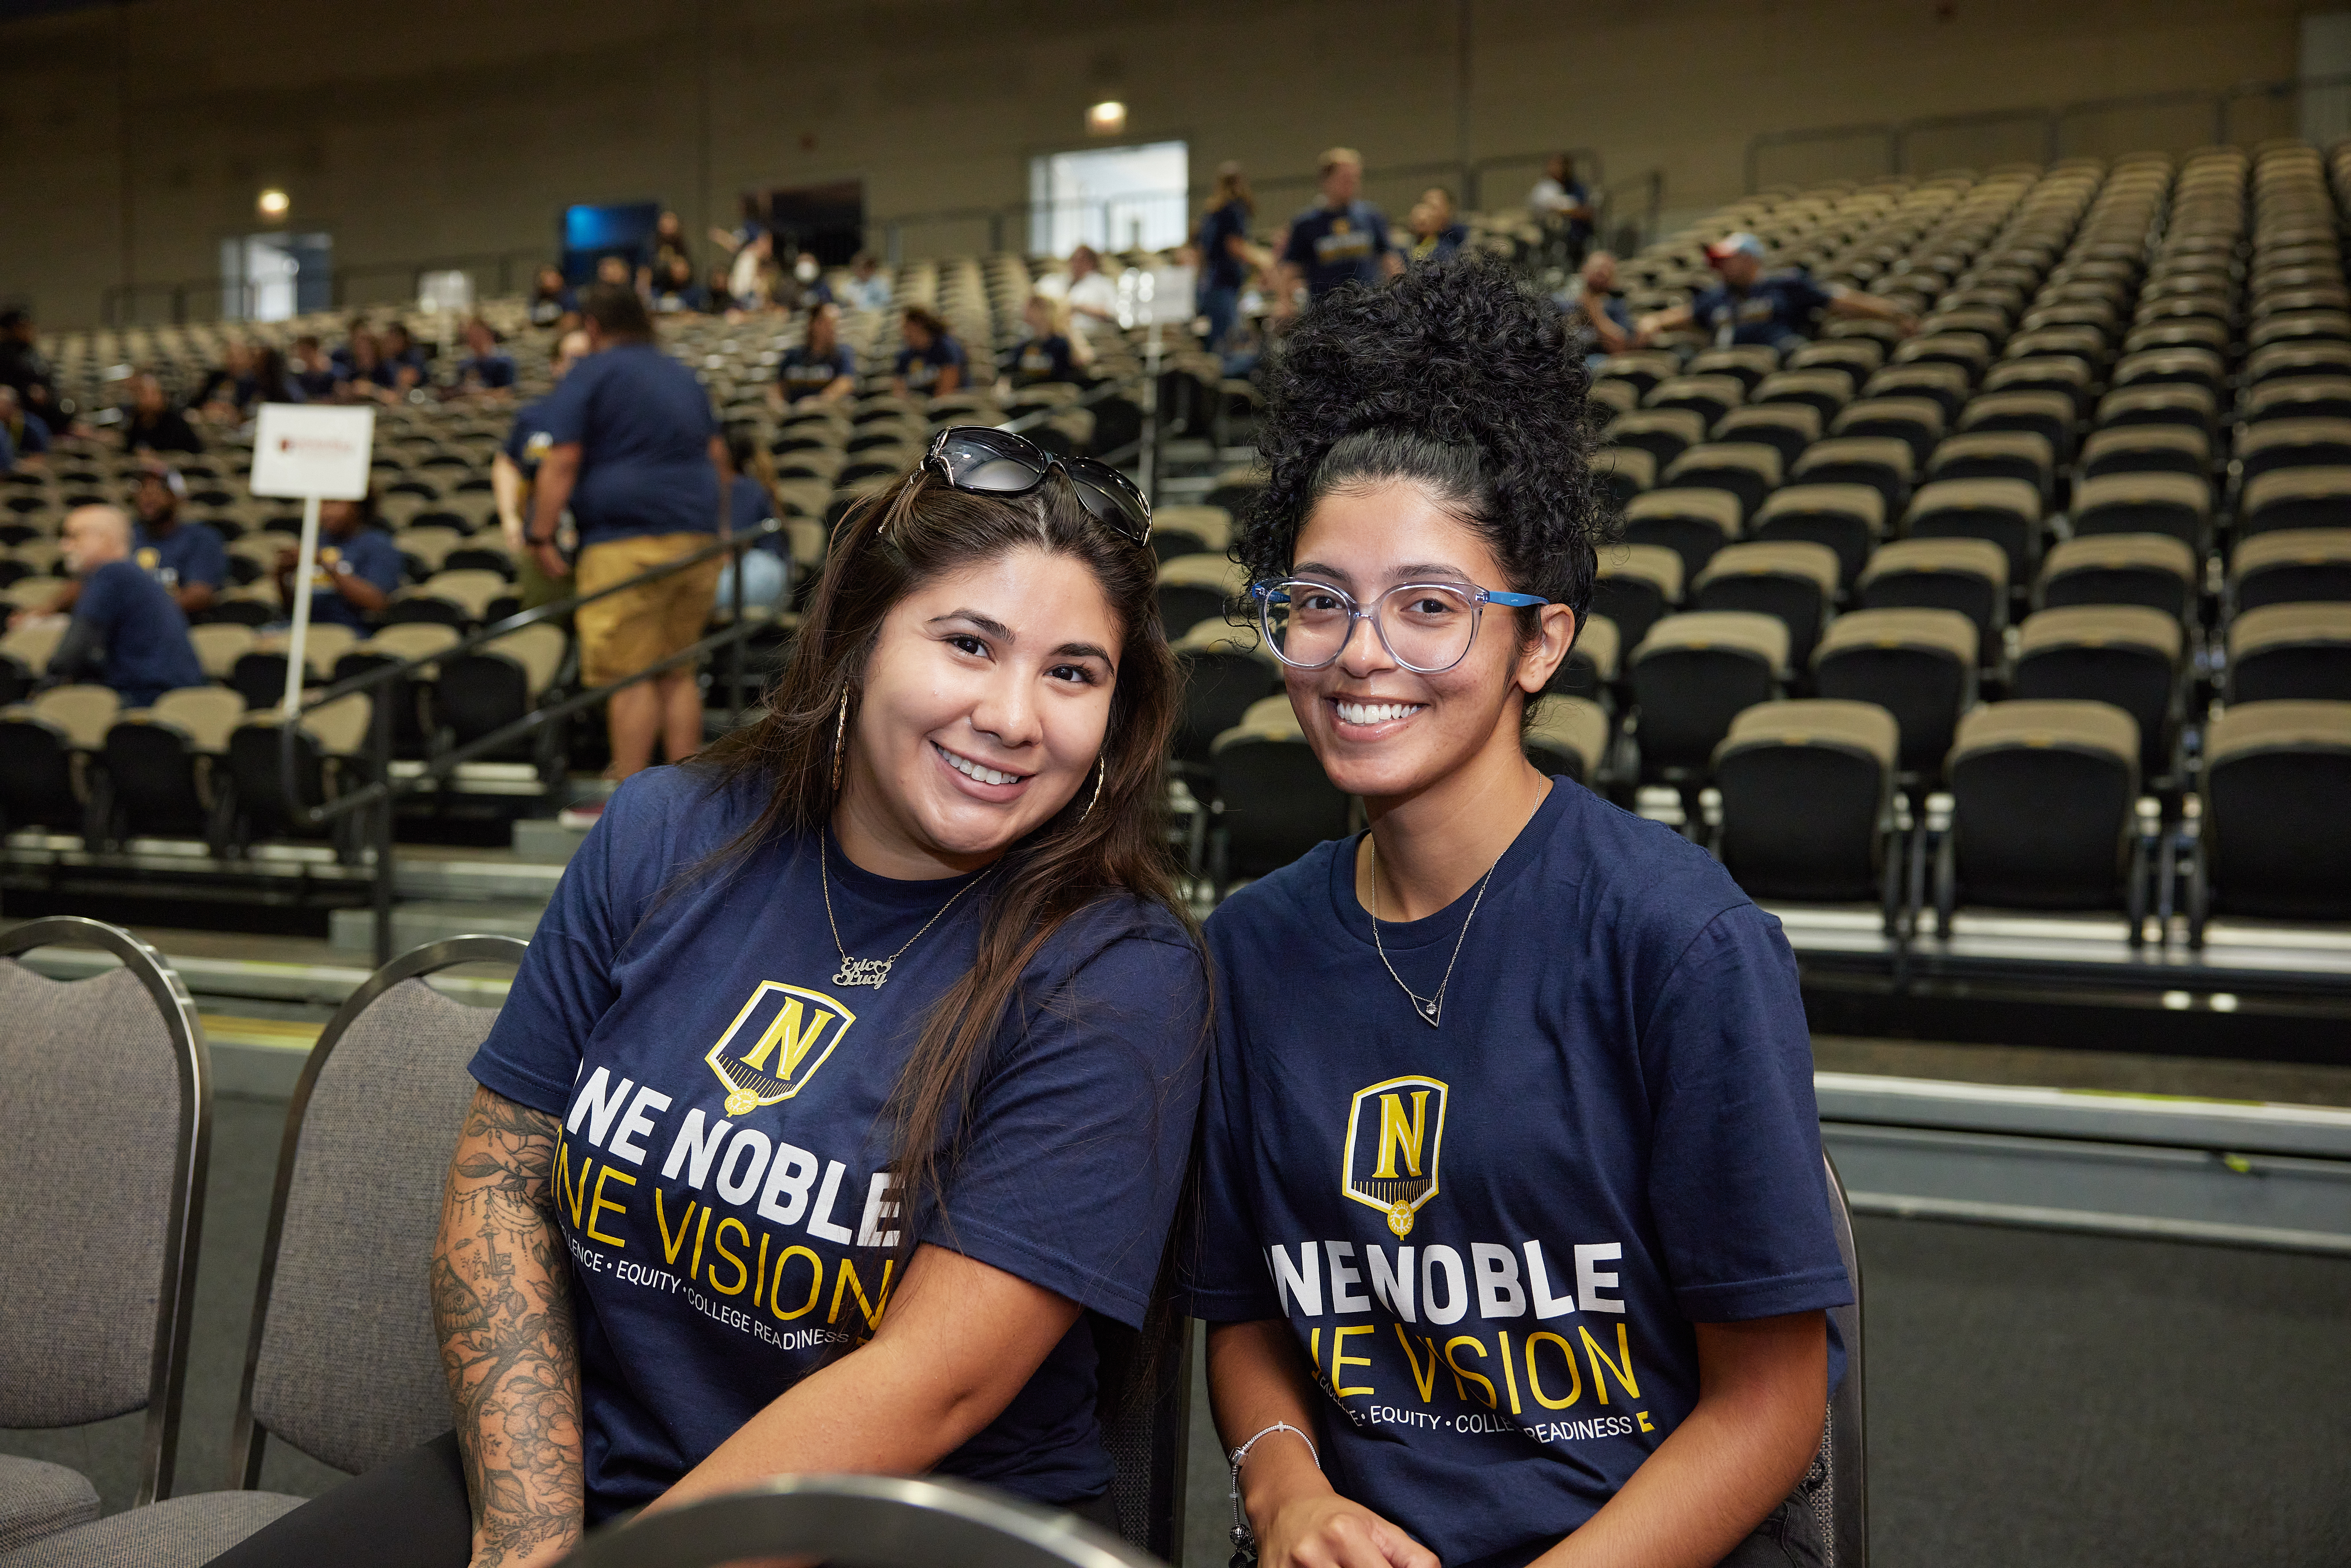 In this photo, two Noble Schools' staff members are sitting and smiling at the camera. They are in an auditorium with hundreds of chairs behind them. They are both wearing dark blue shirts that have the Noble Schools logo on them and say "One Noble, One Vision: Excellence, Equity, and College Readiness".